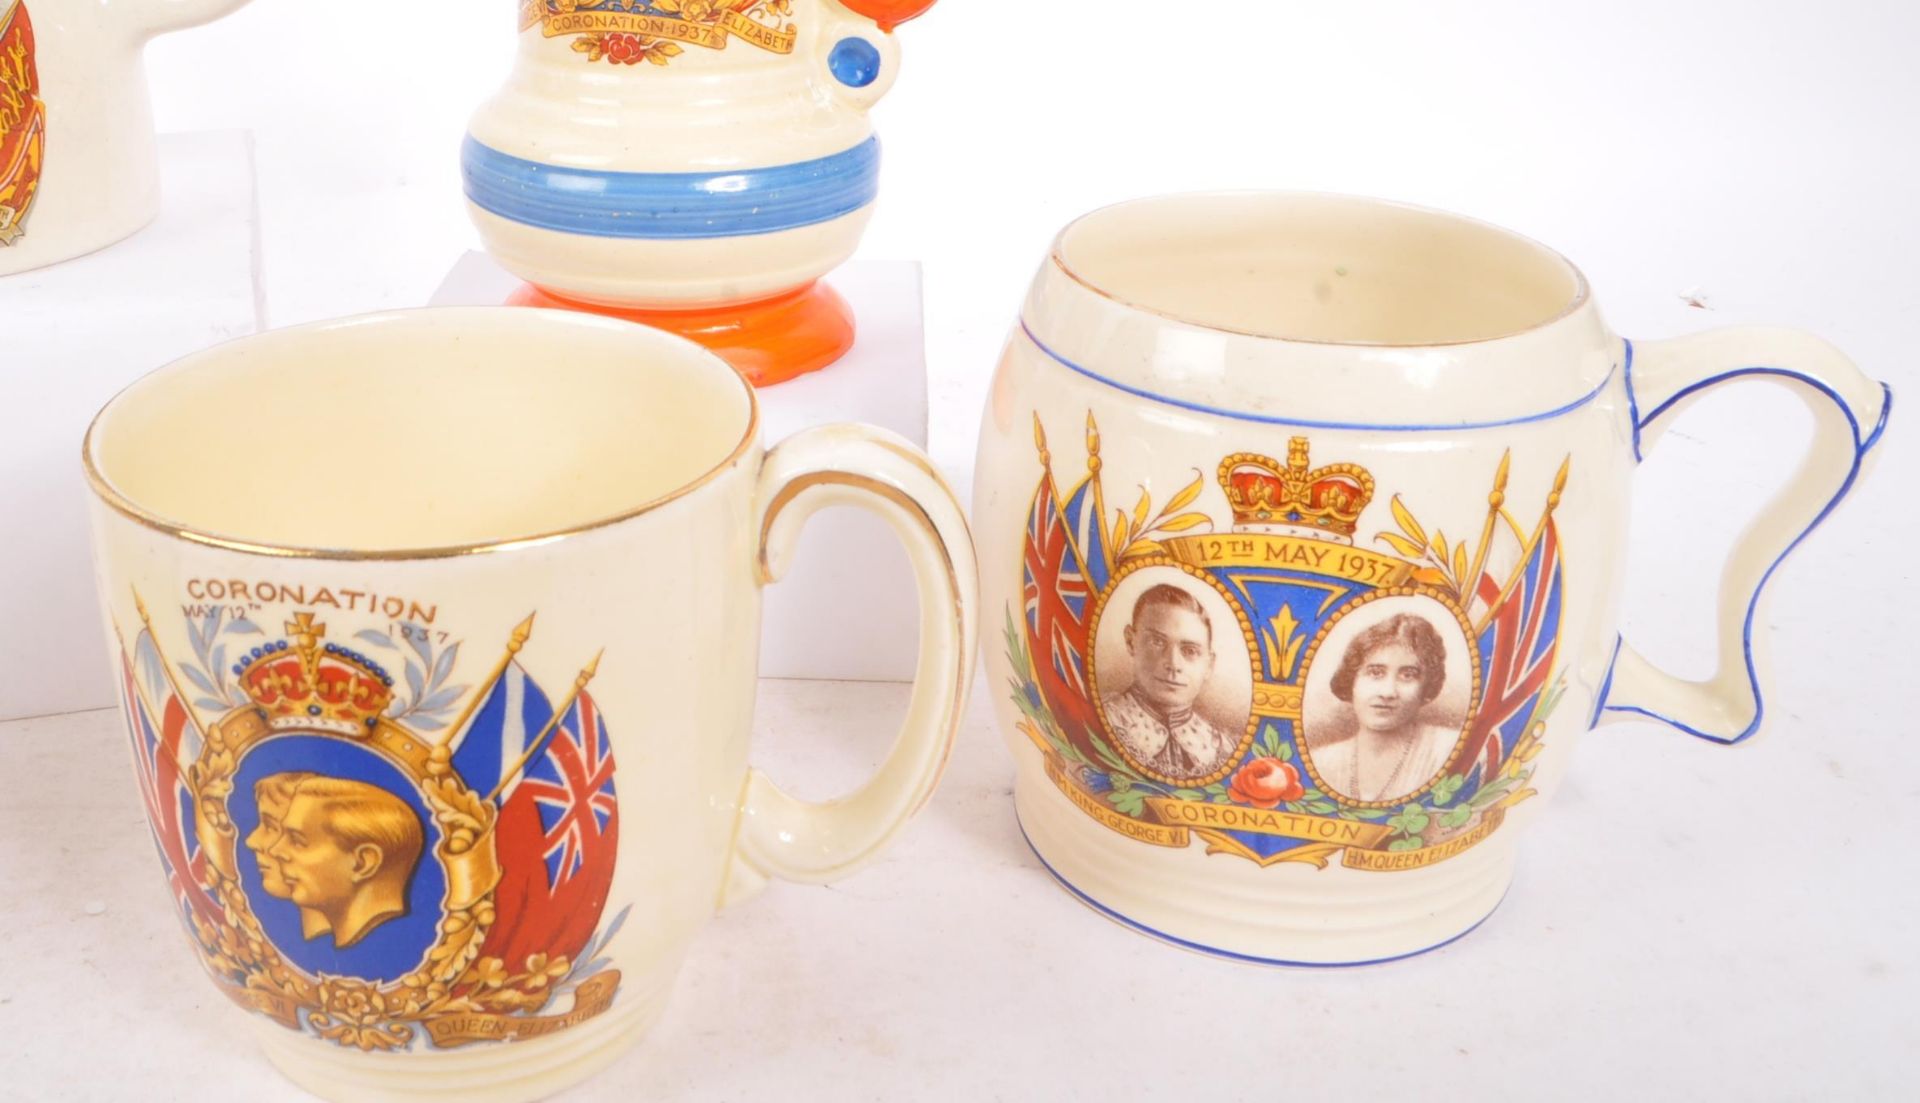 COLLECTION OF CHINA ITEMS - GEORGE VI CORONATION - Image 5 of 6